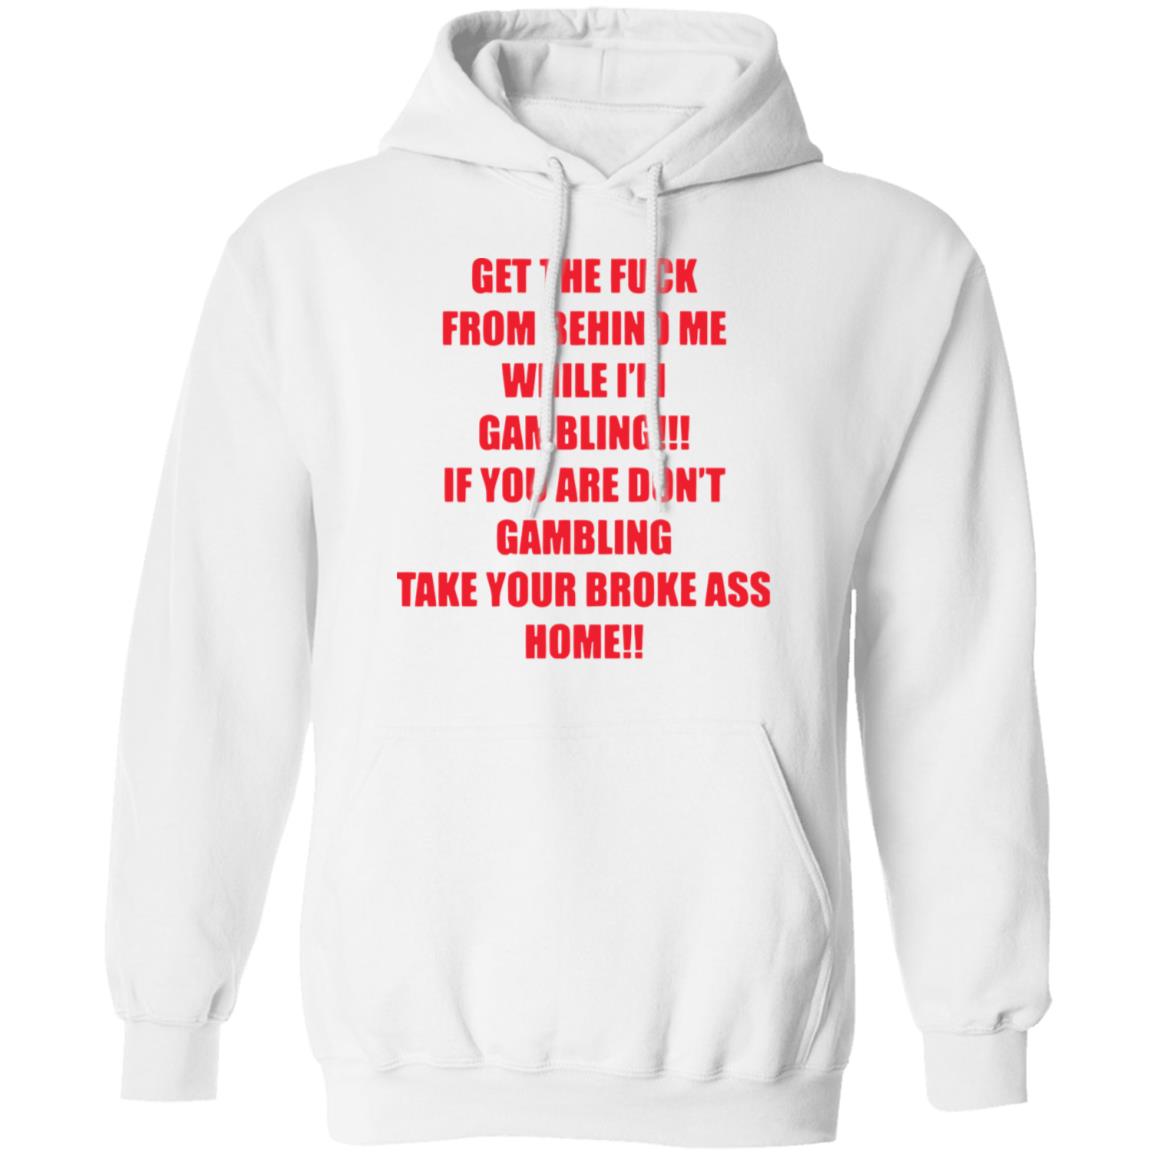 Get The Fuck From Behind Me While I’m Gambling Shirt 1